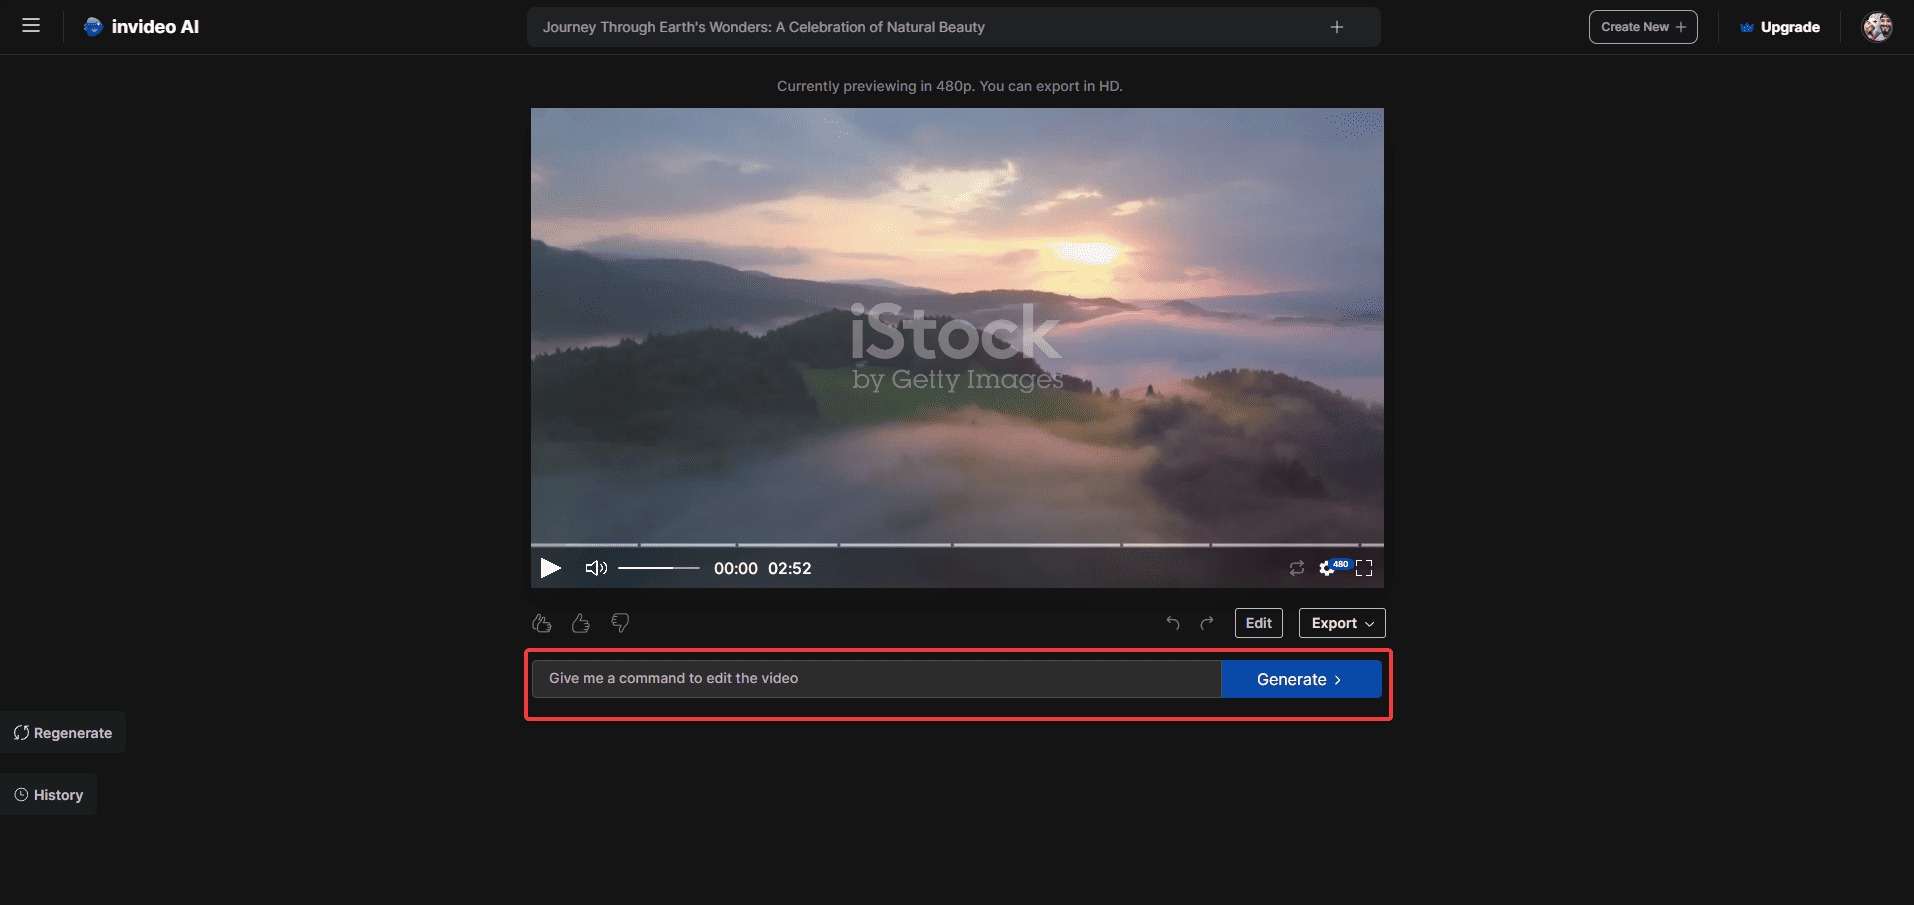 Invideo AI editing by text prompt